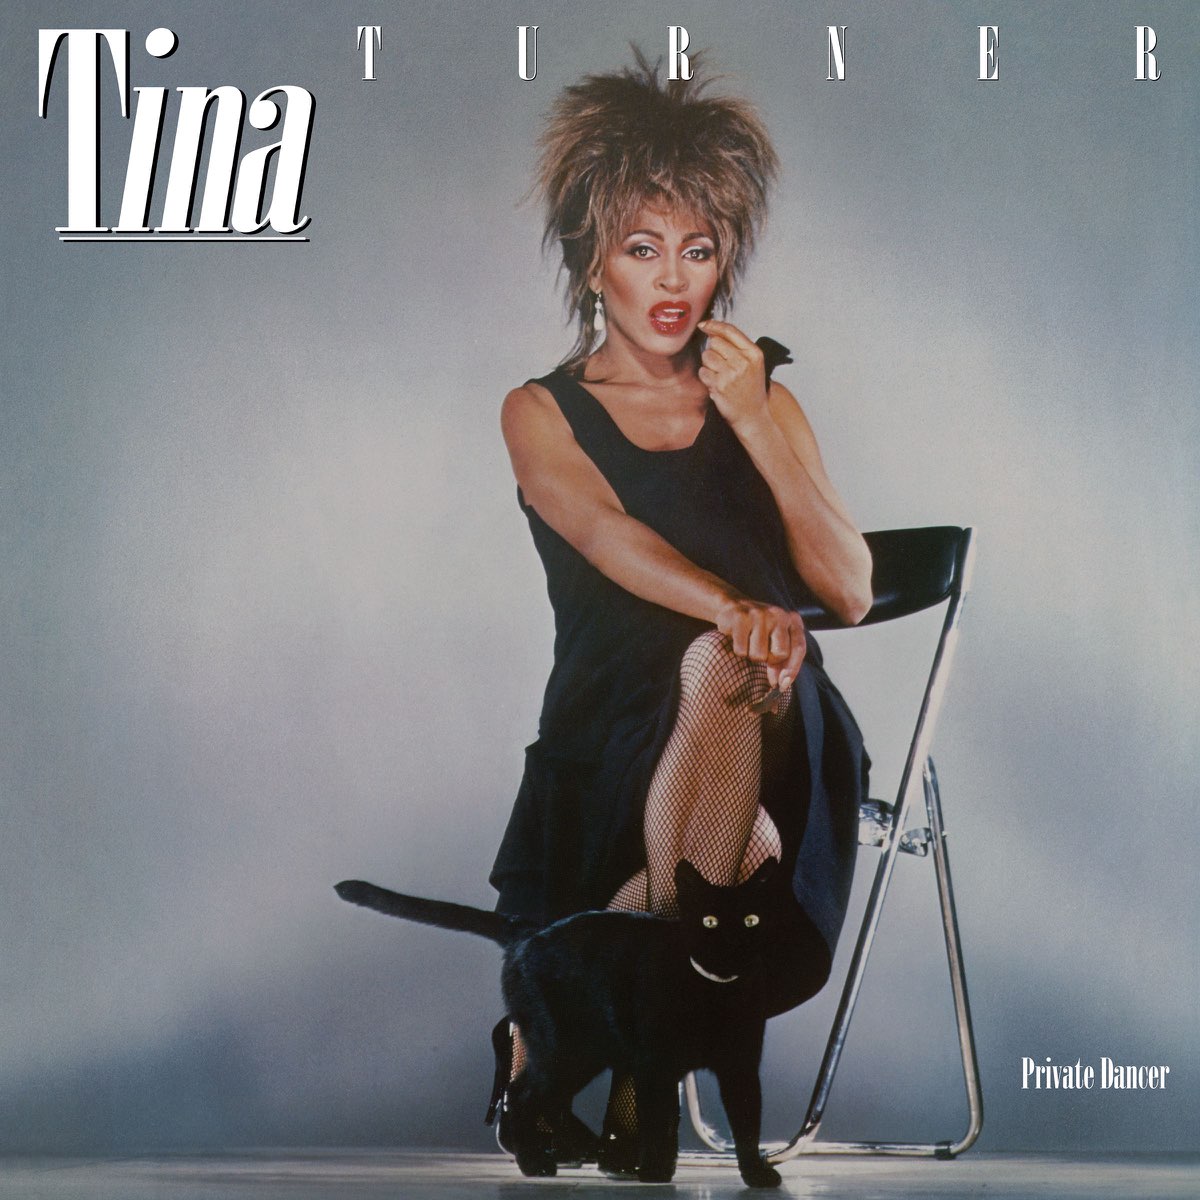 #TinaTurner released her fifth solo studio album ‘Private Dancer’ 40 years ago on May 29, 1984 | Read our anniversary tribute by @BeyondTheEncore + listen to the album here: album.ink/tinaturnerPD